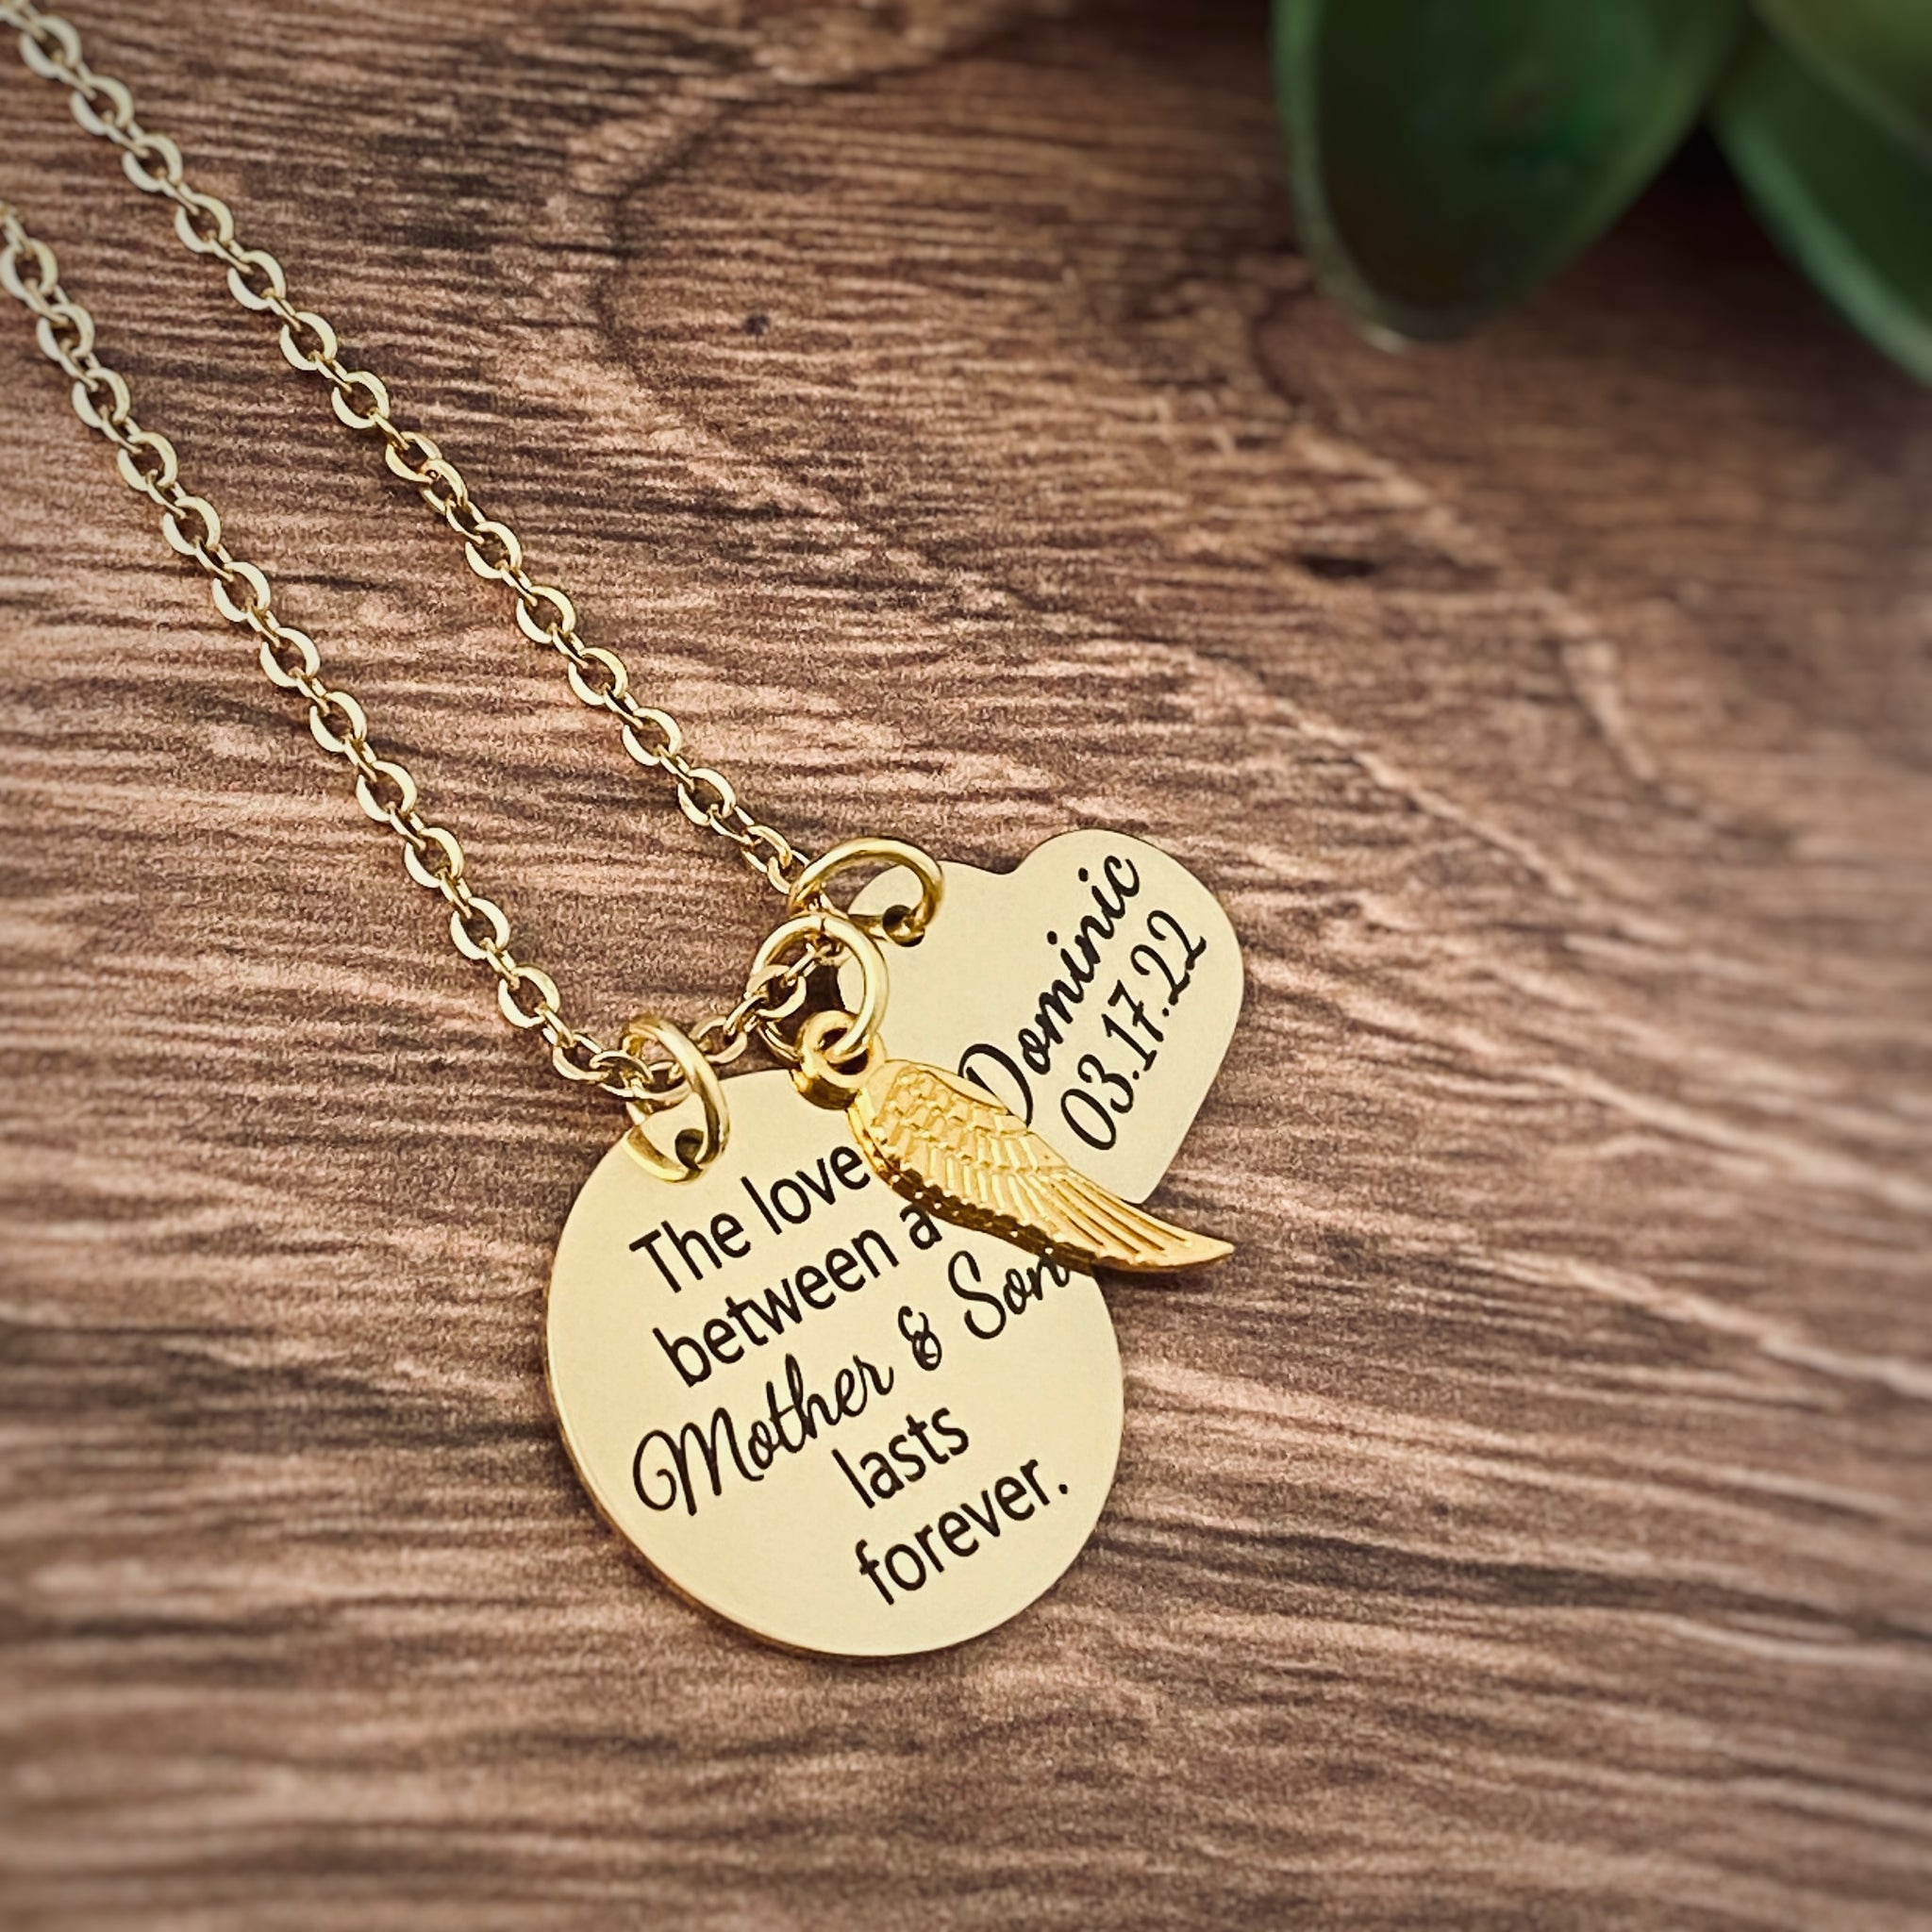 Son Necklace, Son Necklace for Mom, Mom Necklace, Mom Gift From Son, Boy Mom  Gift, Mom Pendant Necklace, Mother & Son, Mom of Boys - Etsy | Sunshine  necklace, Gifts for mom,